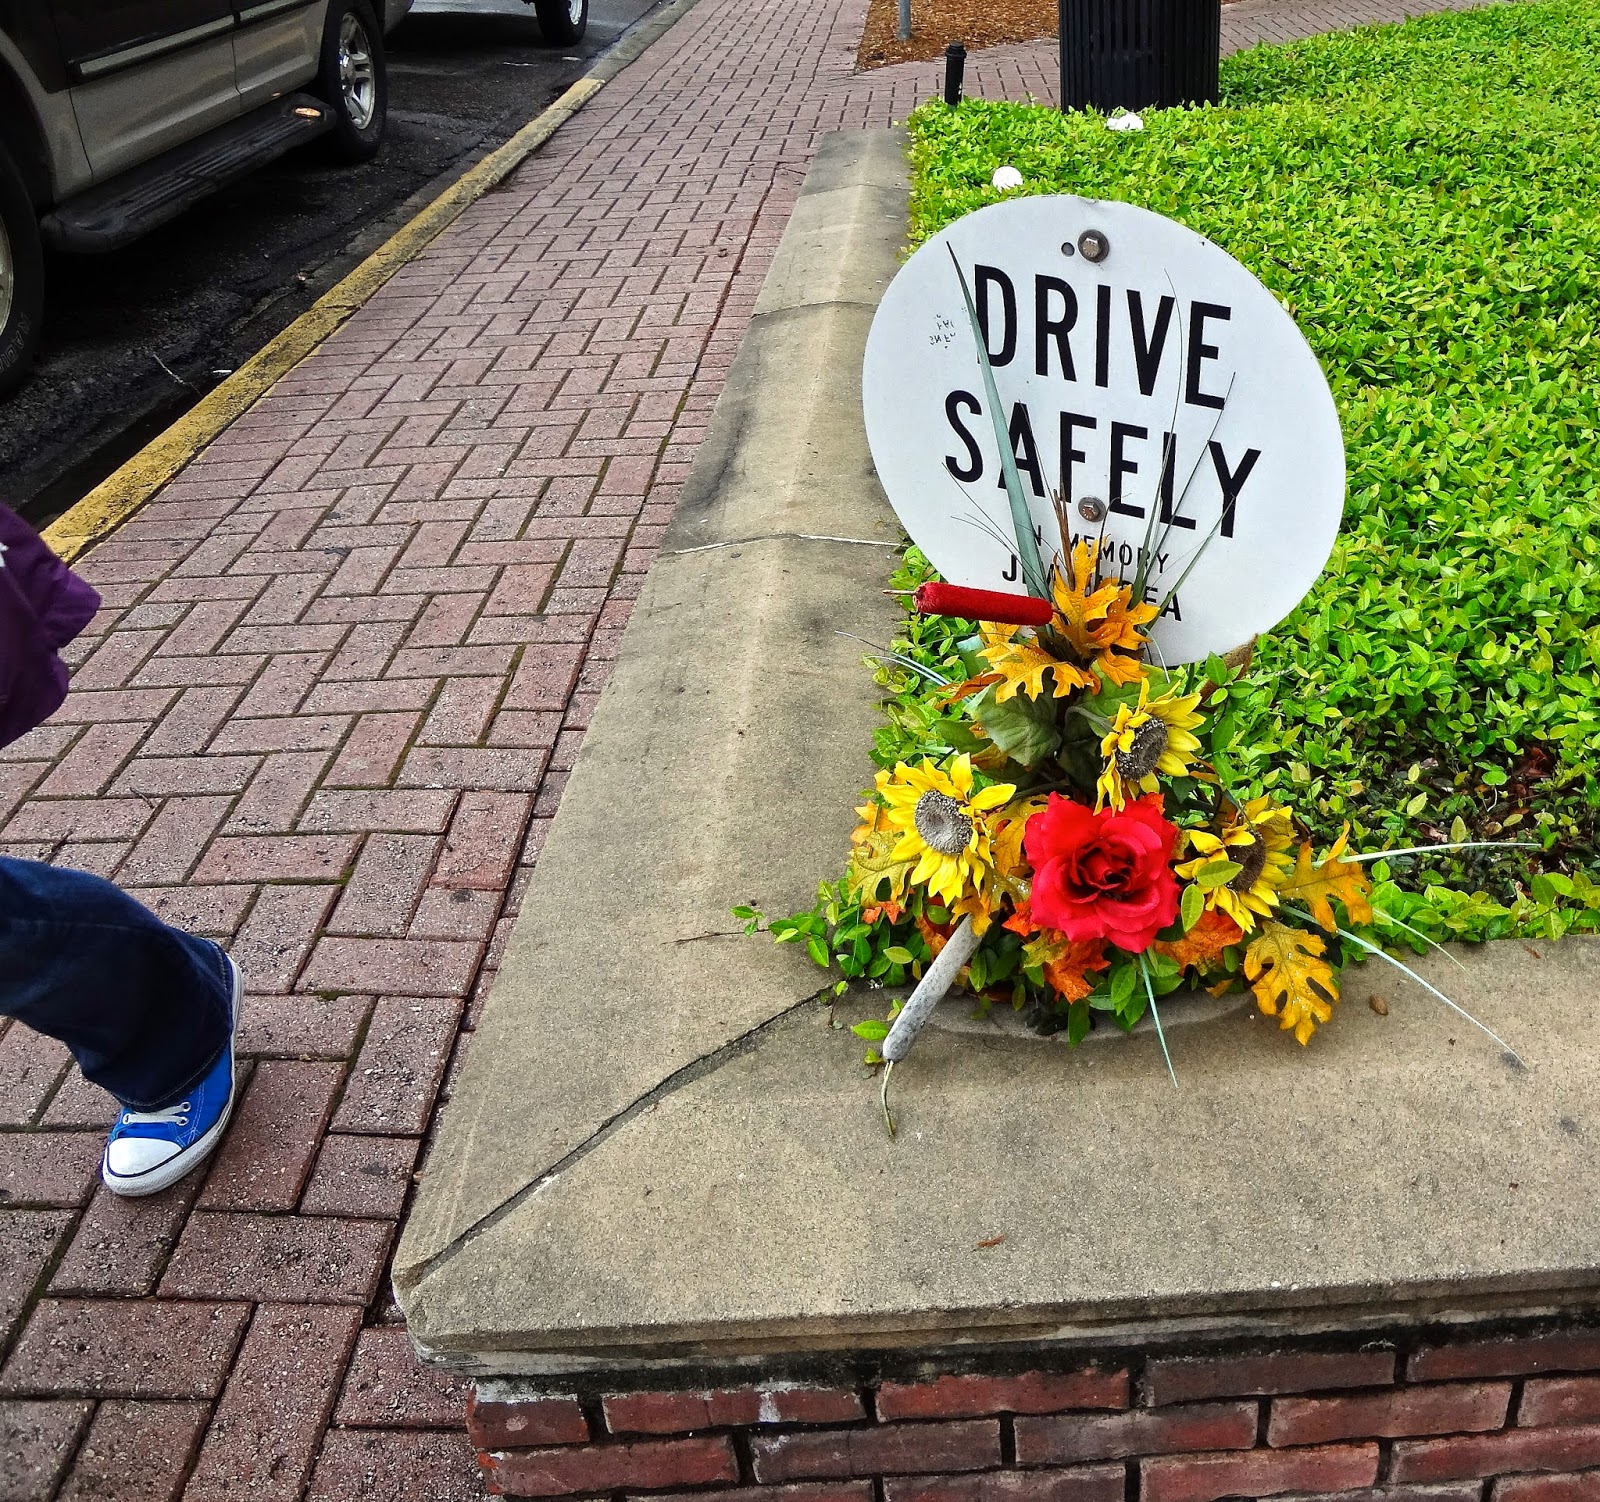 Tallahassee Daily Photo: Drive Safely